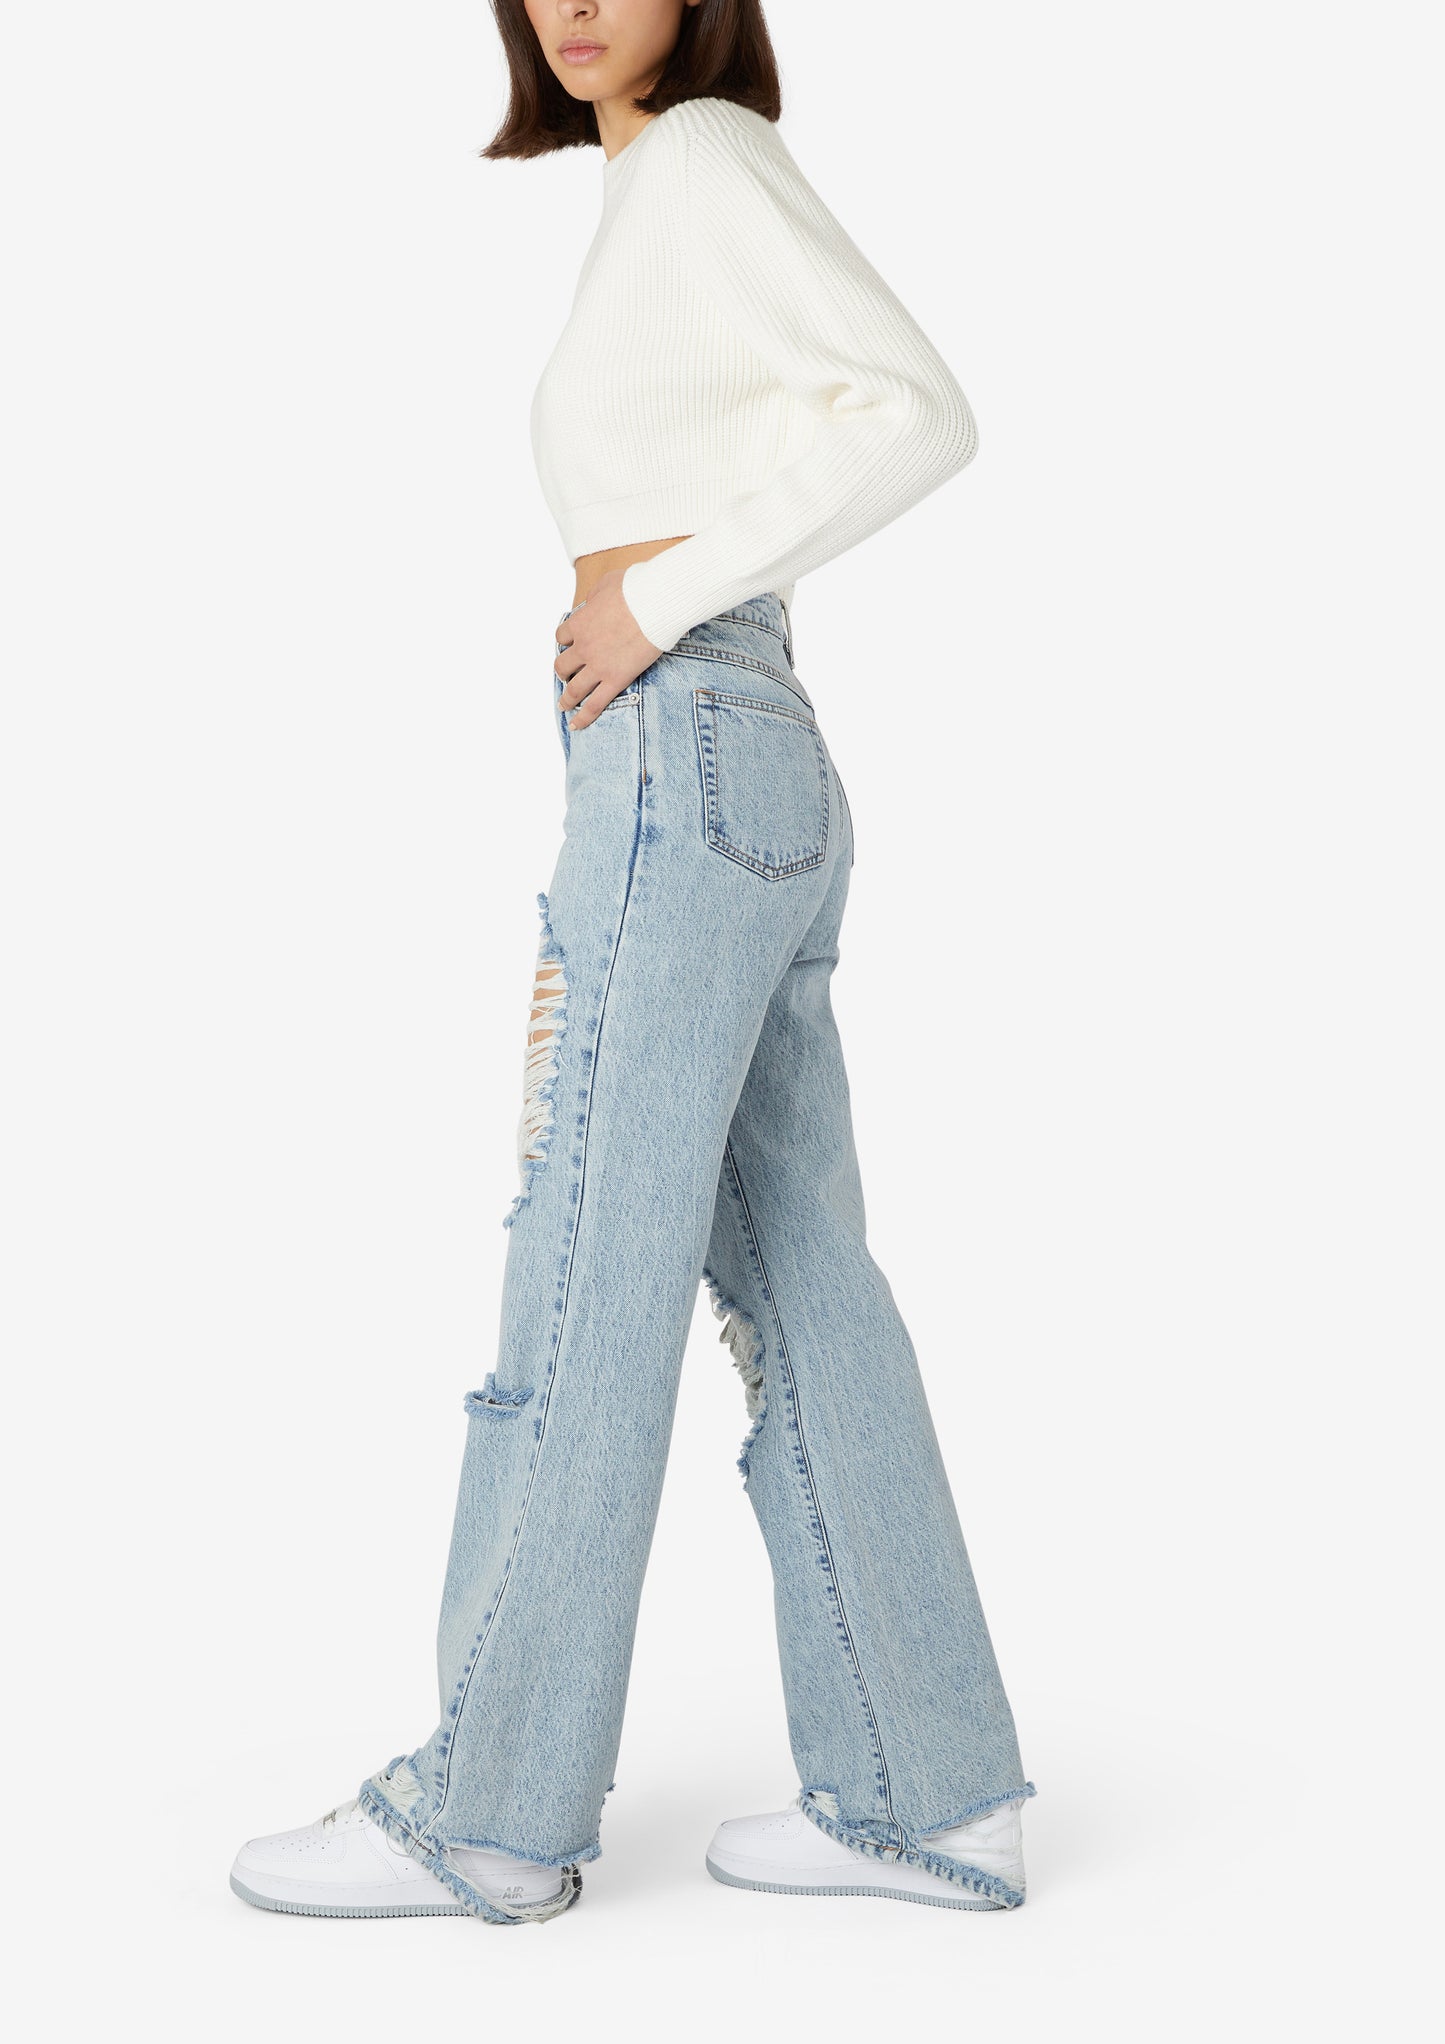 Flos Jeans - Evelyn